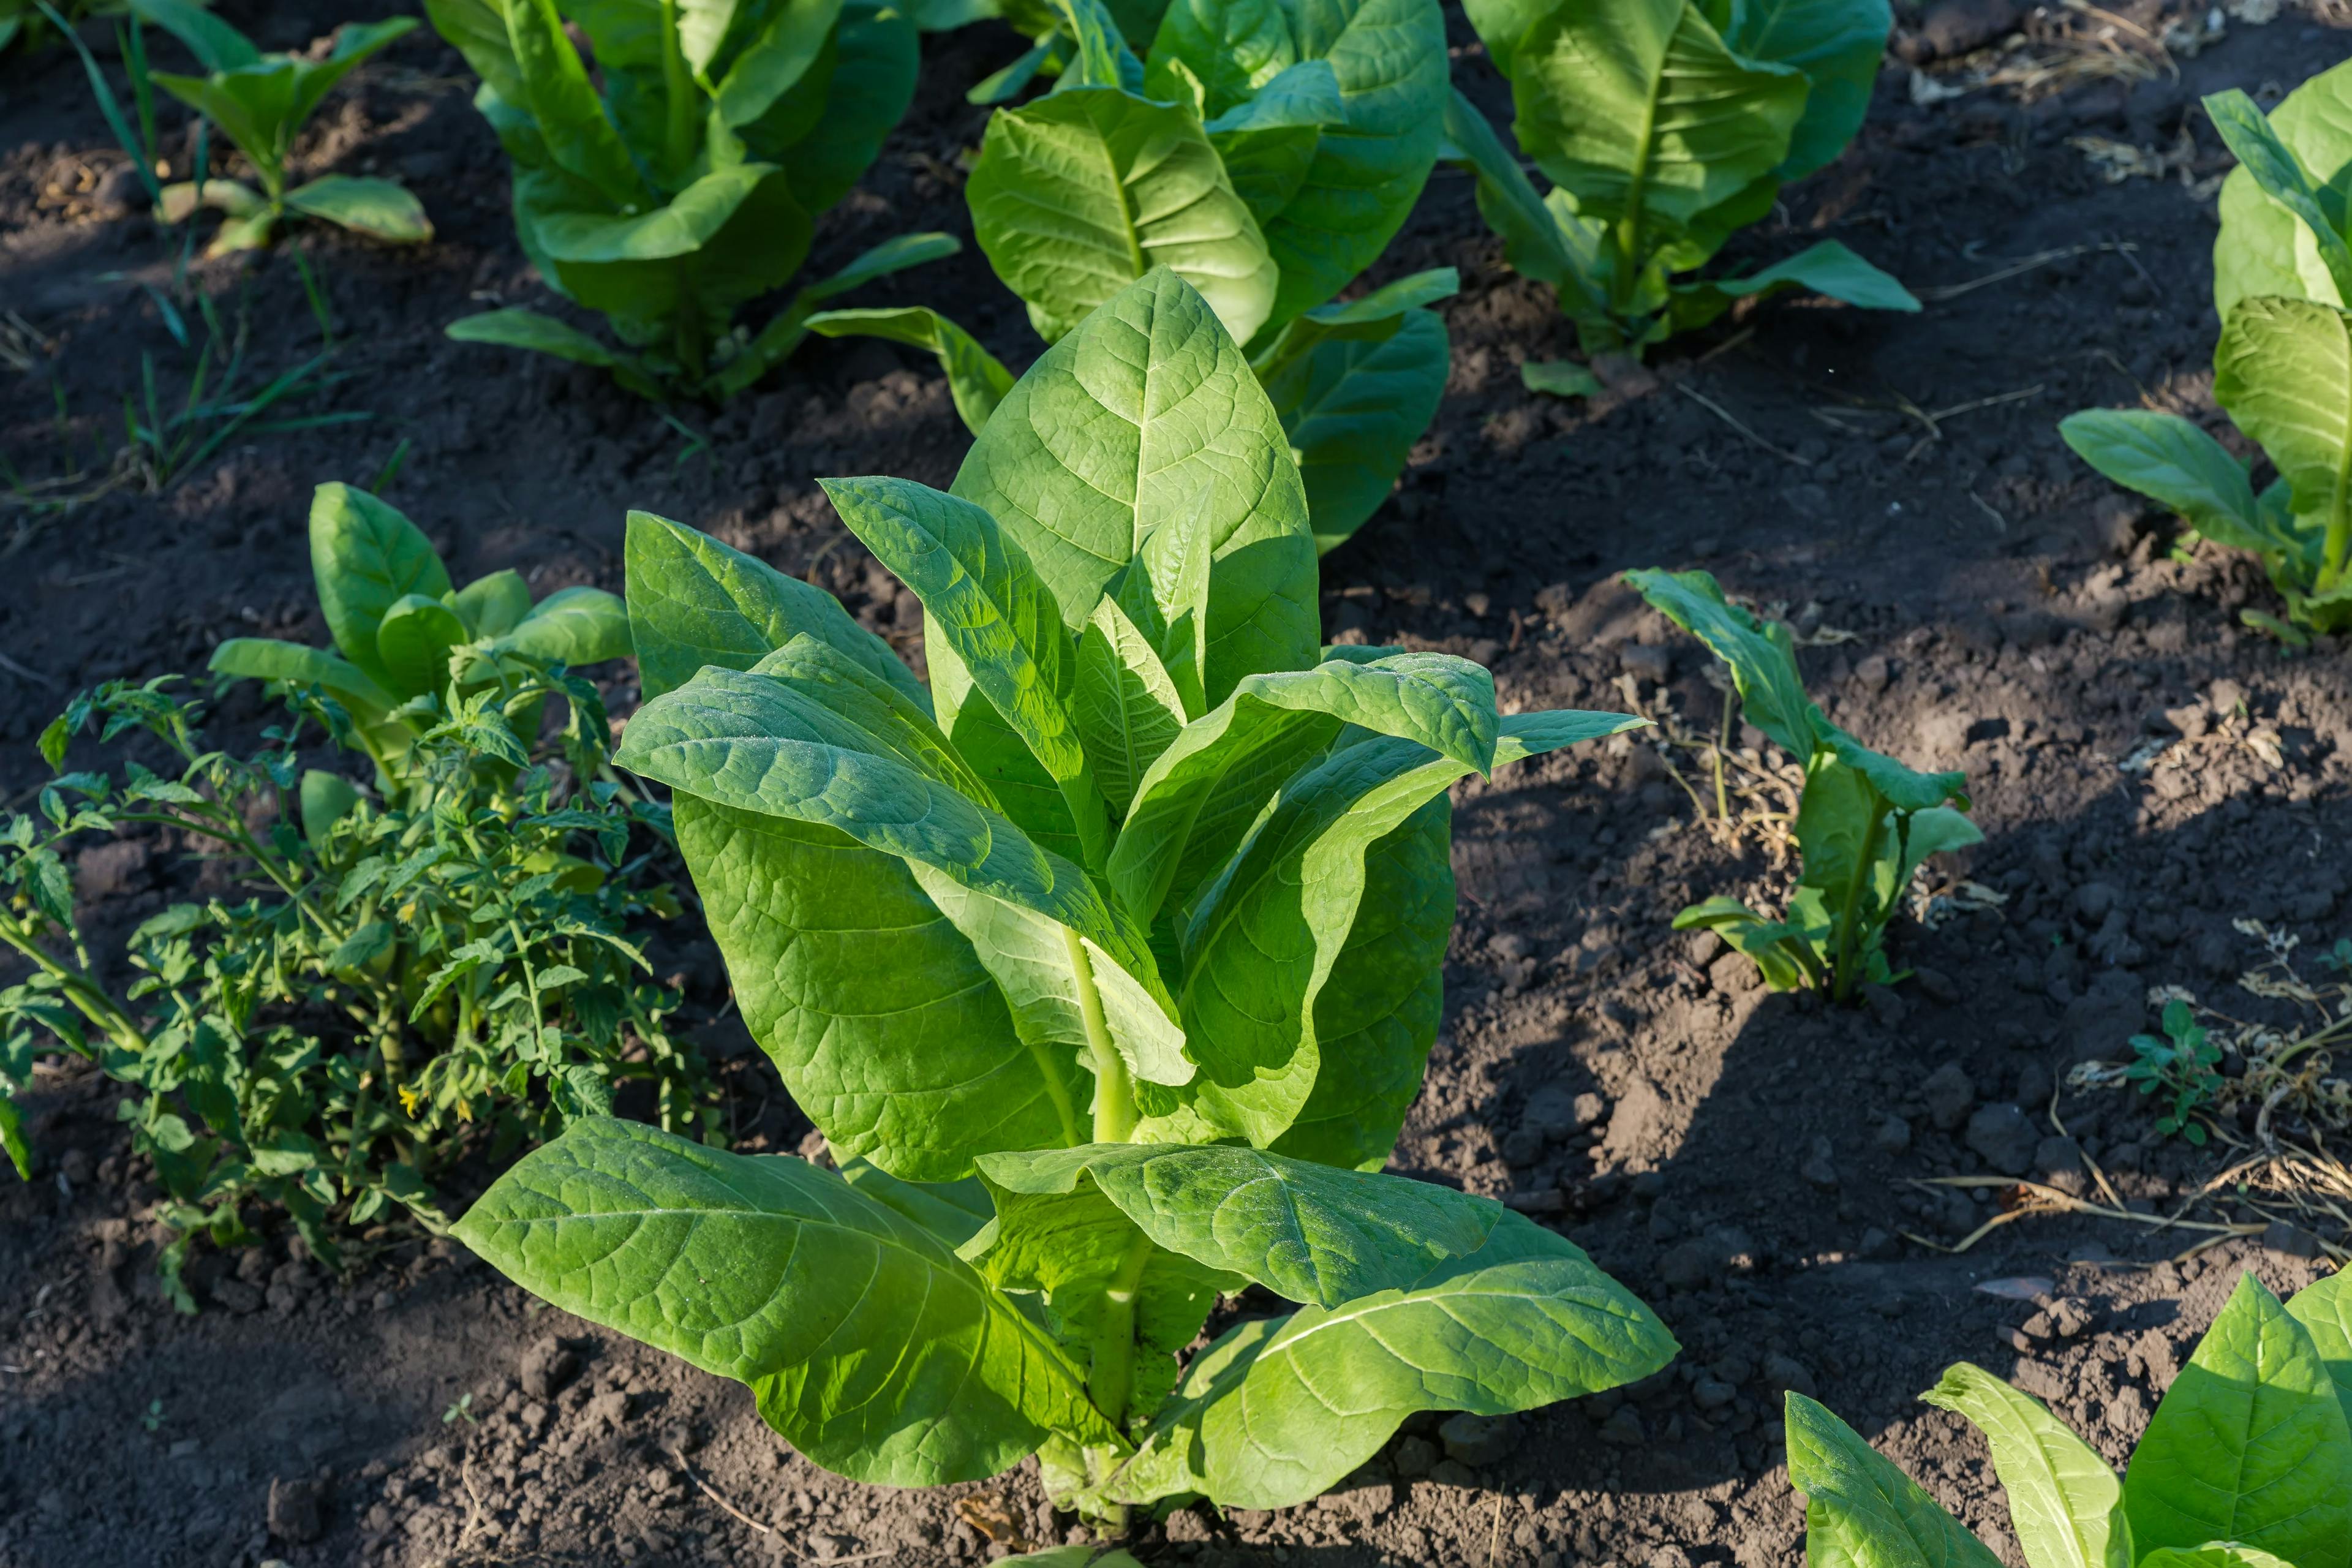 Young stems of the tobacco on field at sunny morning | Image Credit: © An-T - stock.adobe.com